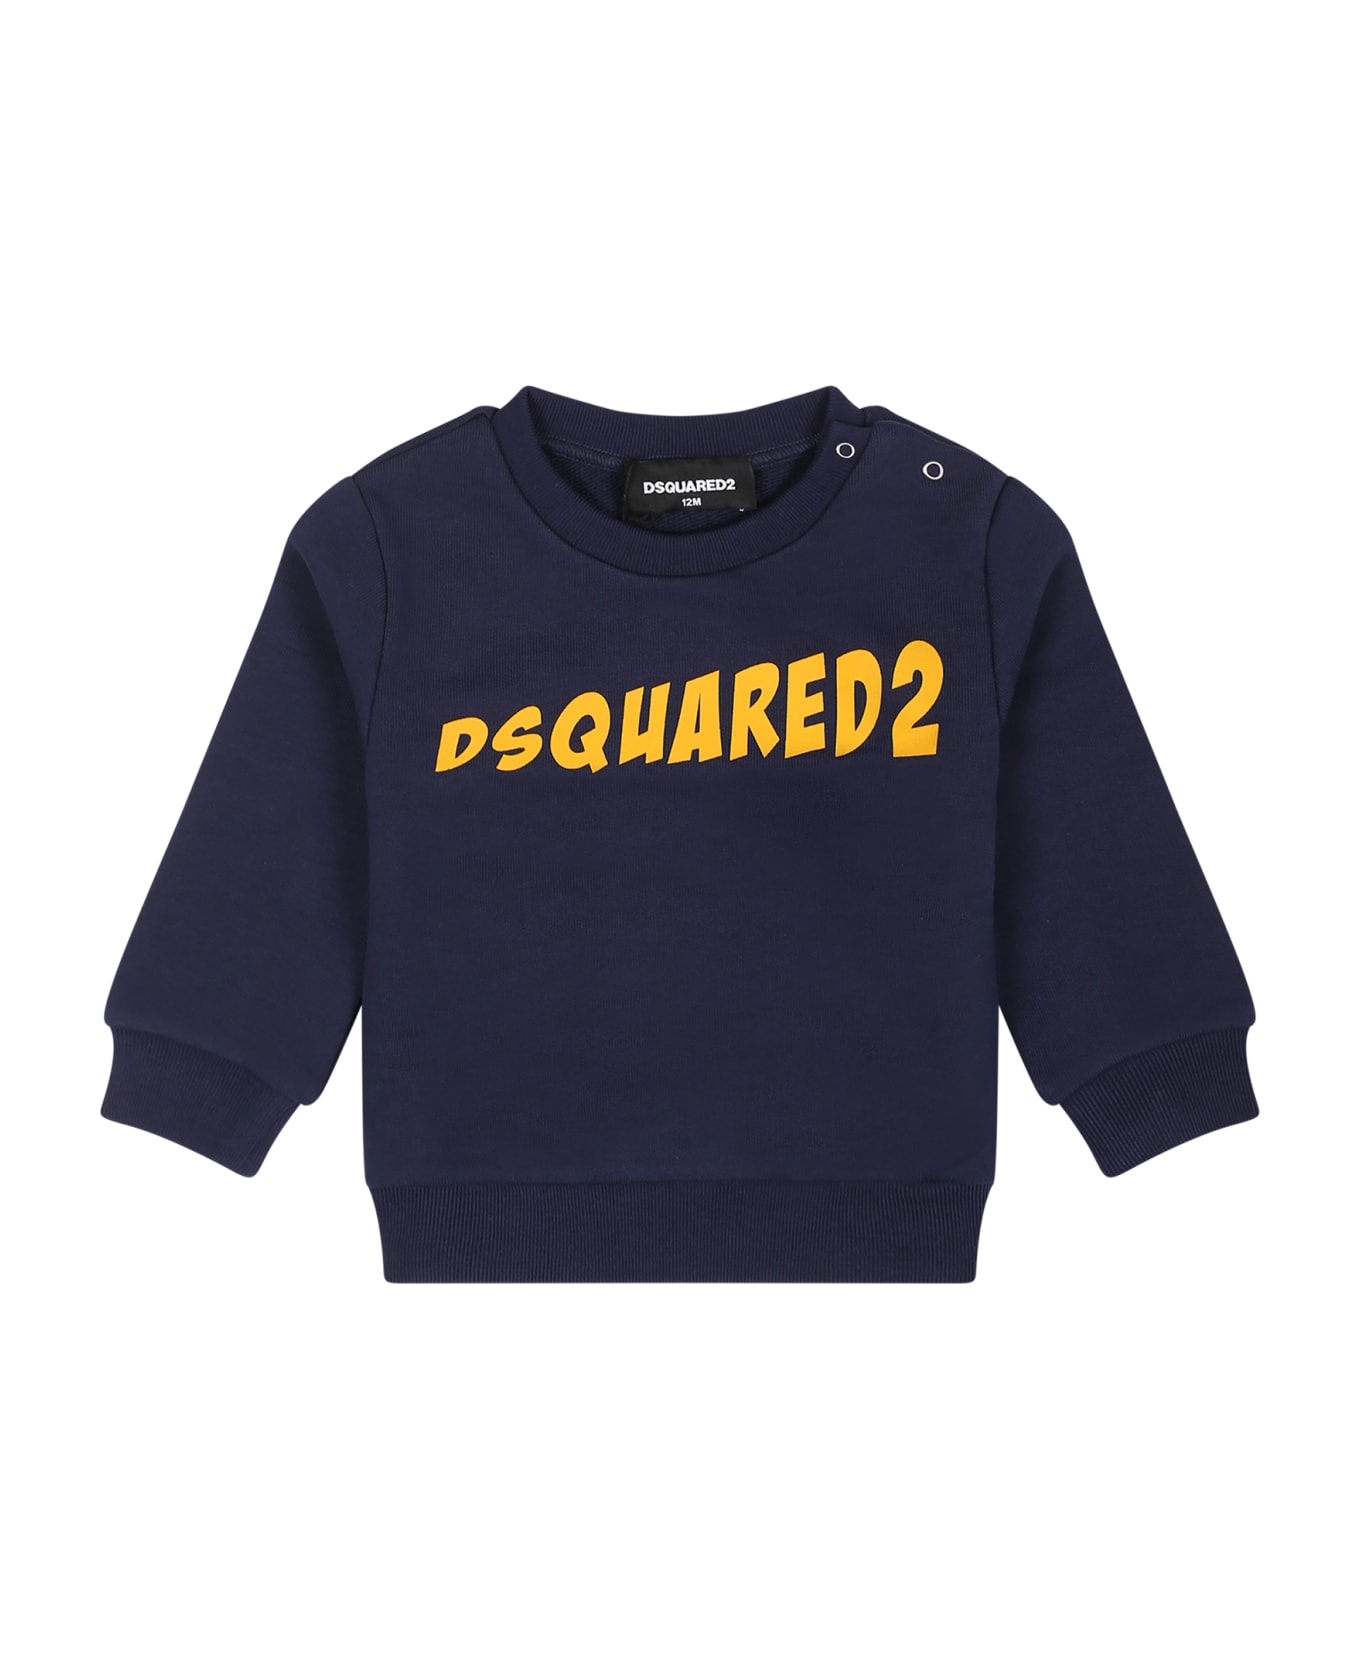 Dsquared2 Blue Sweatshirt For Baby Boy With Logo - Blue